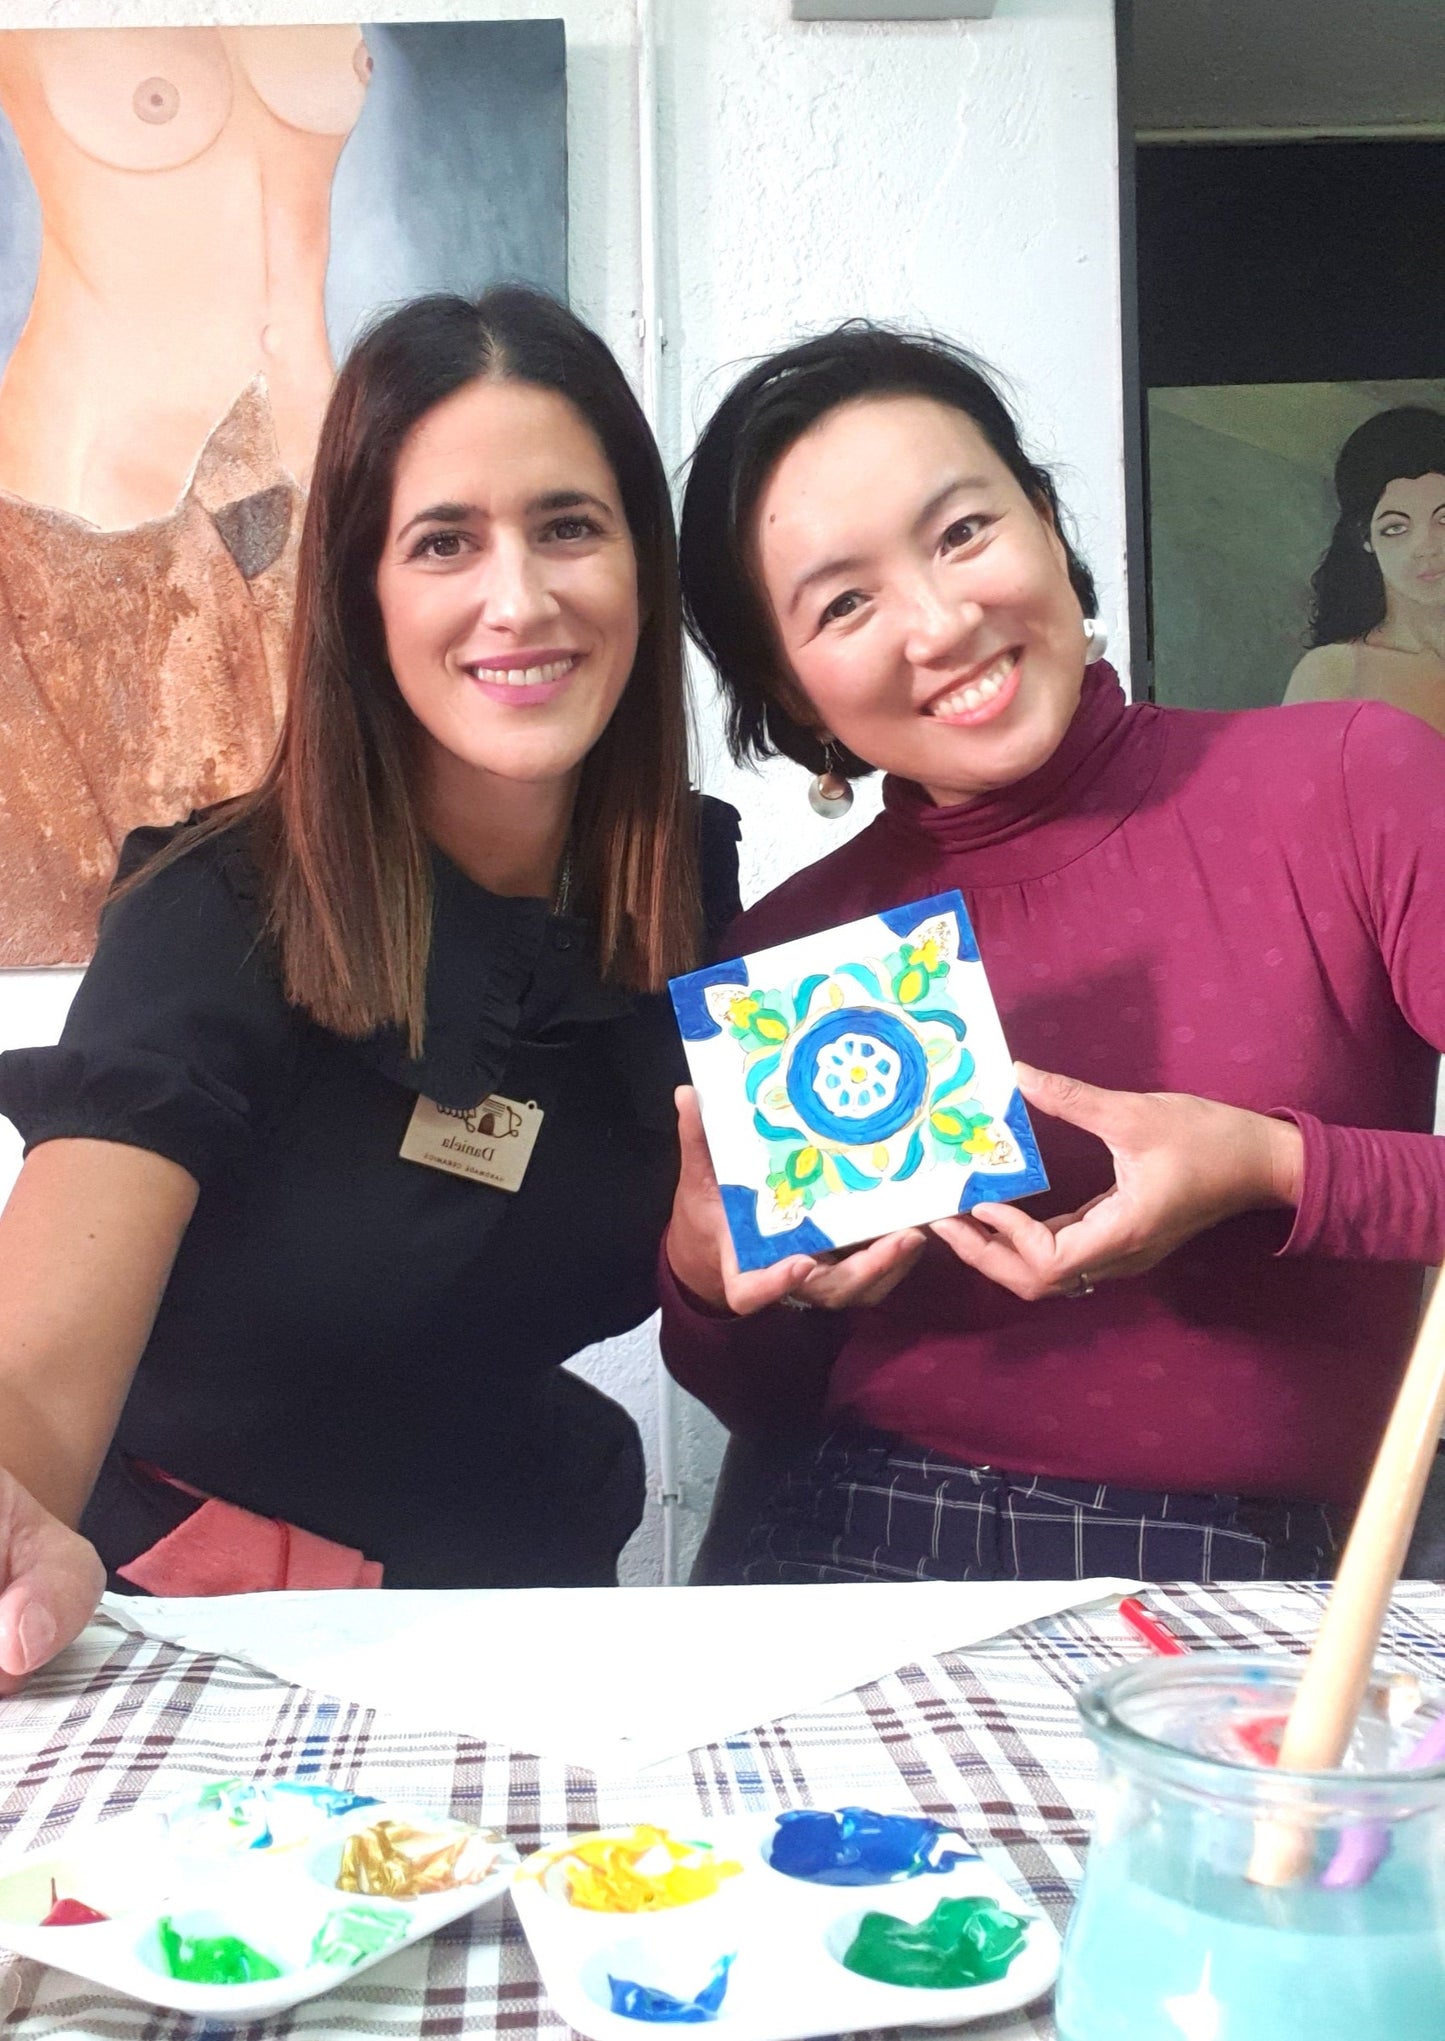 Tile Painting Workshop - in Porto, Portugal